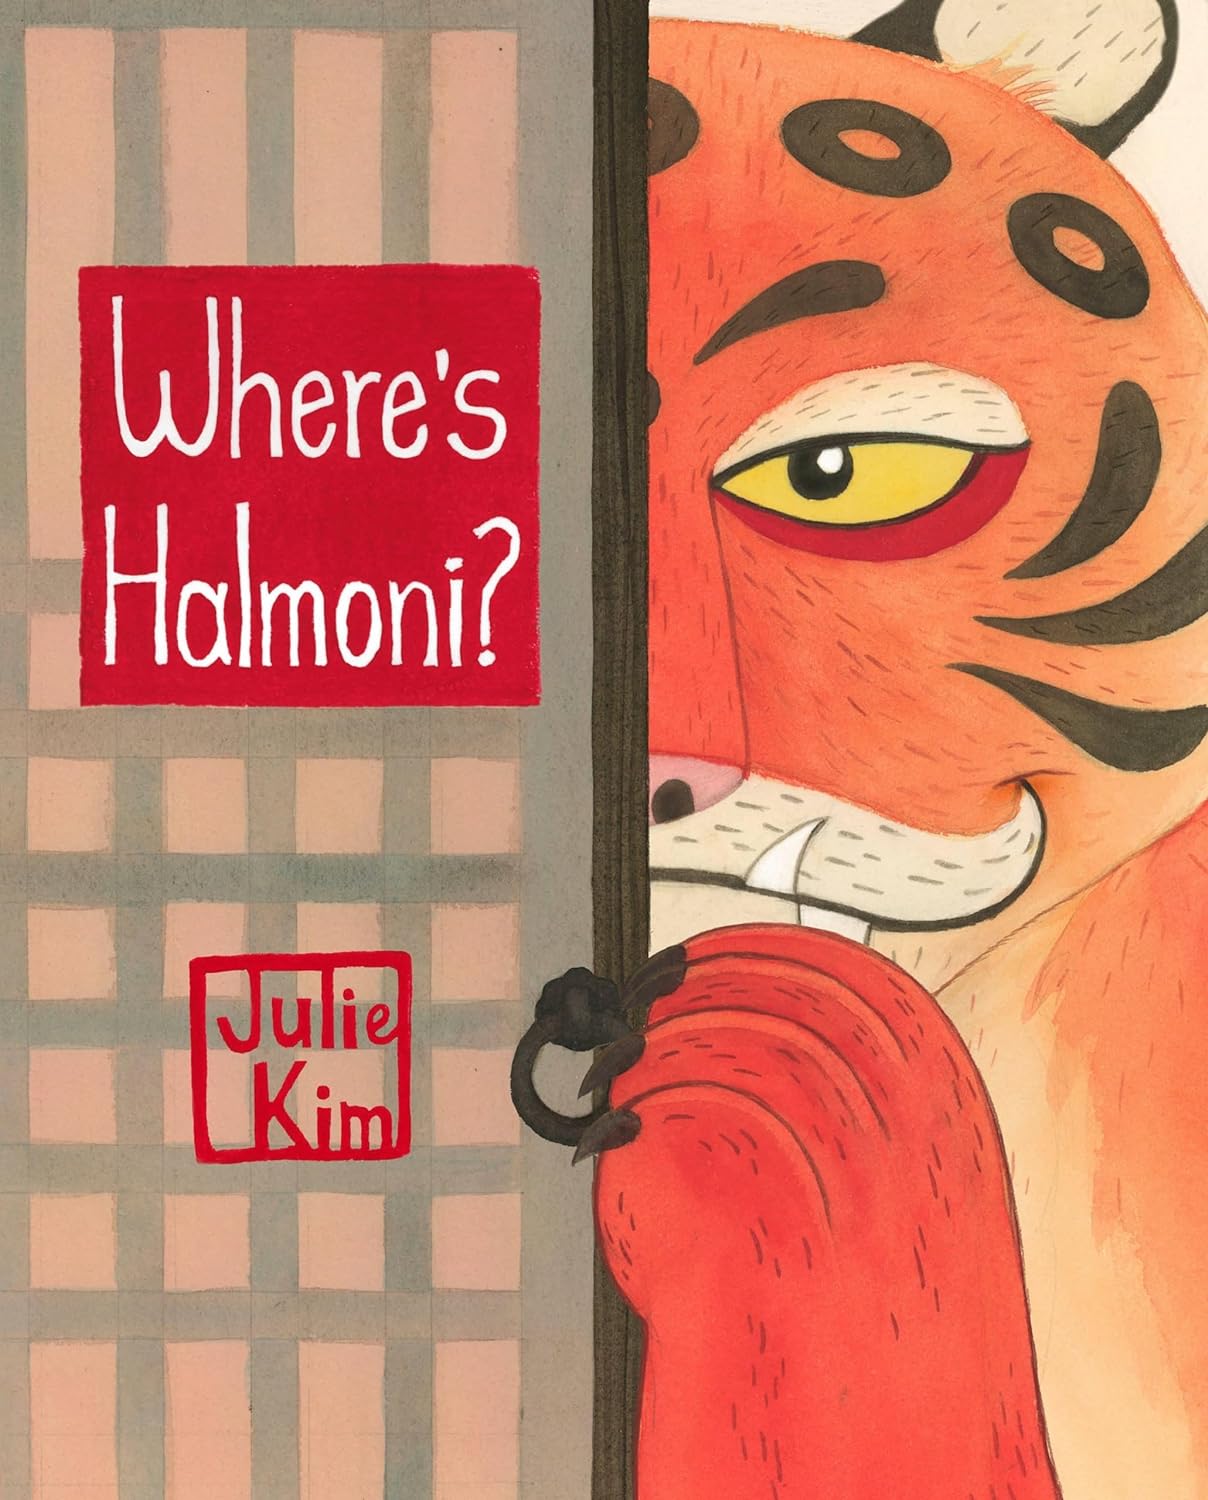 Where's Halmoni? Bilingual Korean and English children's book about family